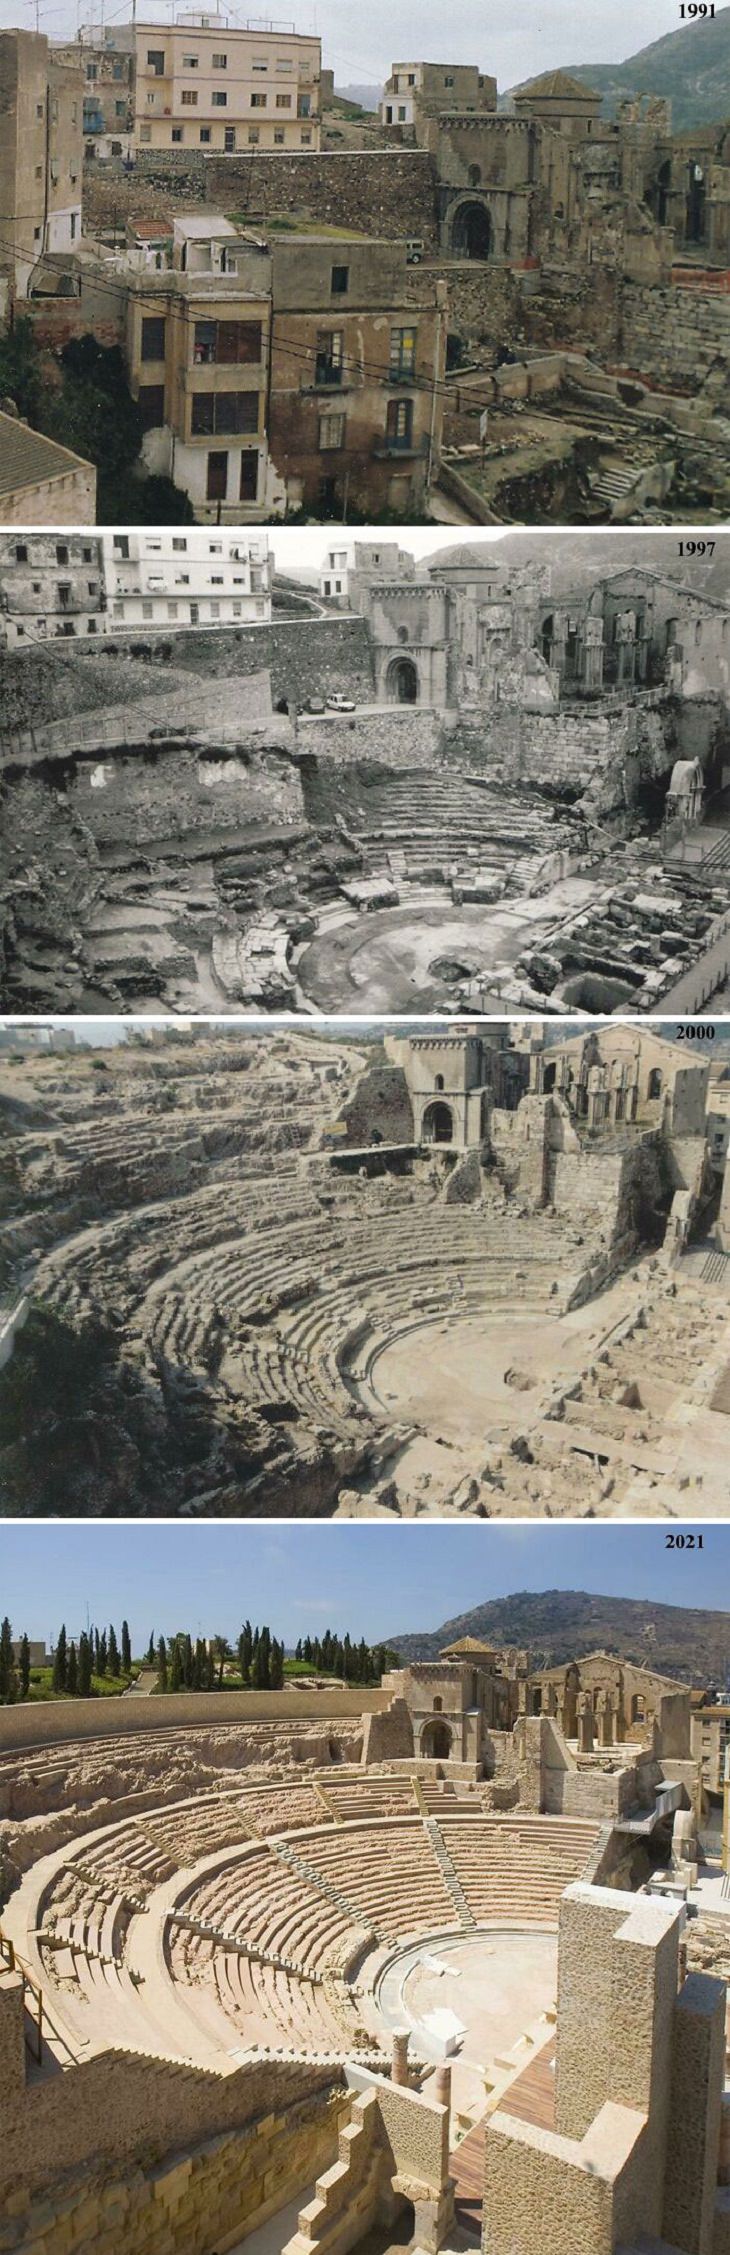 Before & After Photos, Roman Theatre Of Cartagena 